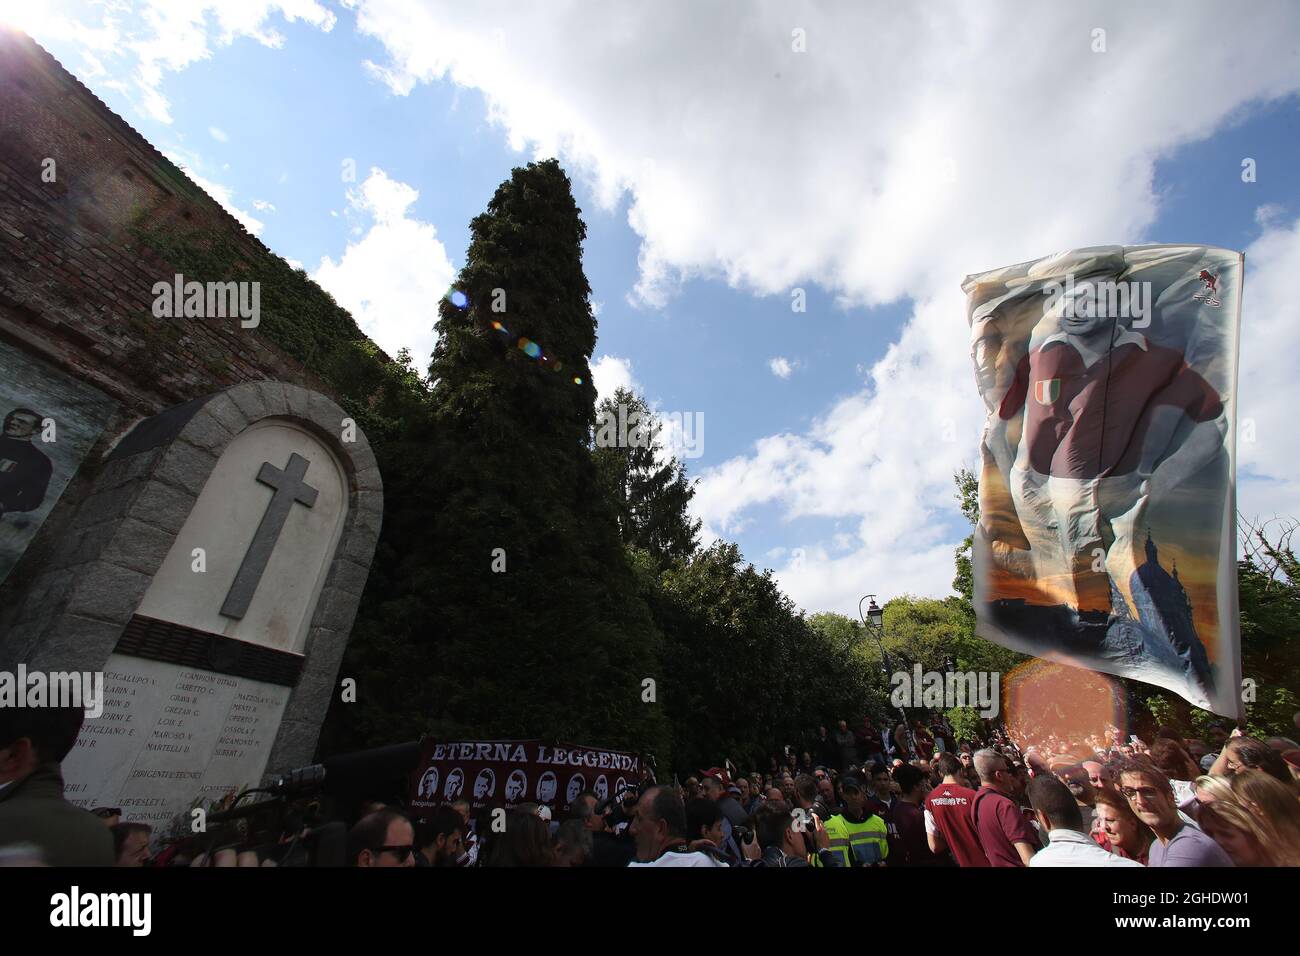 A giant flag depicting the Cathedral of Superga and Grande Torino captain Valentino Mazzola during the memorial service for the victims of the Superga Air disaster at the Superga Cathedral, Turin. Picture date: 4th May 2019. Picture credit should read: Jonathan Moscrop/Sportimage via PA Images Stock Photo